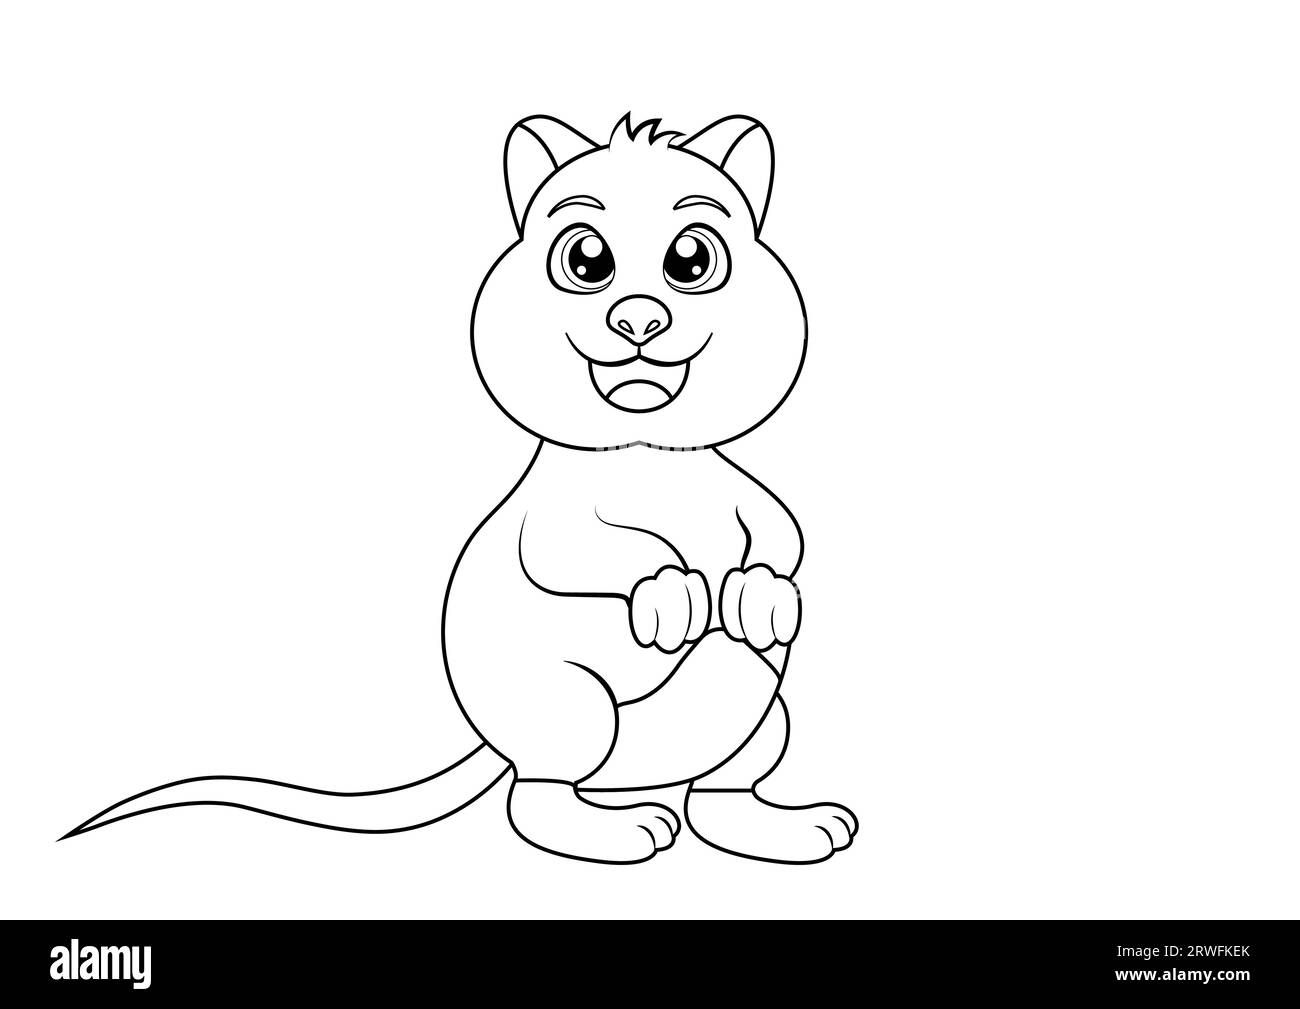 Quokka Coloring Book: Easy Quokka Coloring Books For Kids And Adults  Relaxing